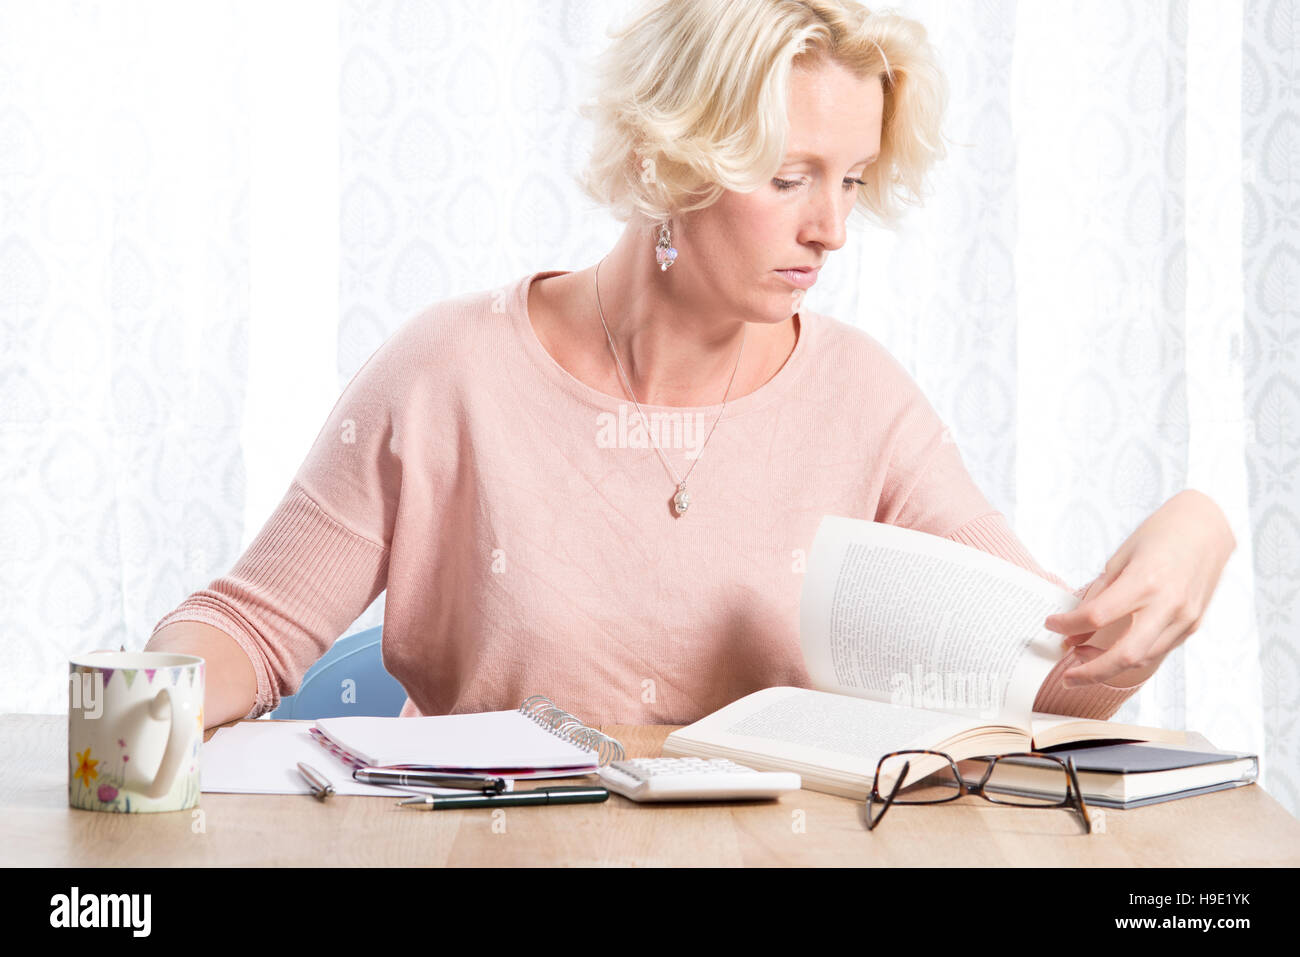 A blonde woman casually dressed in a pink jumper with necklace turns the page of a book while researching some work.  She sits at a wooden desk with a Stock Photo